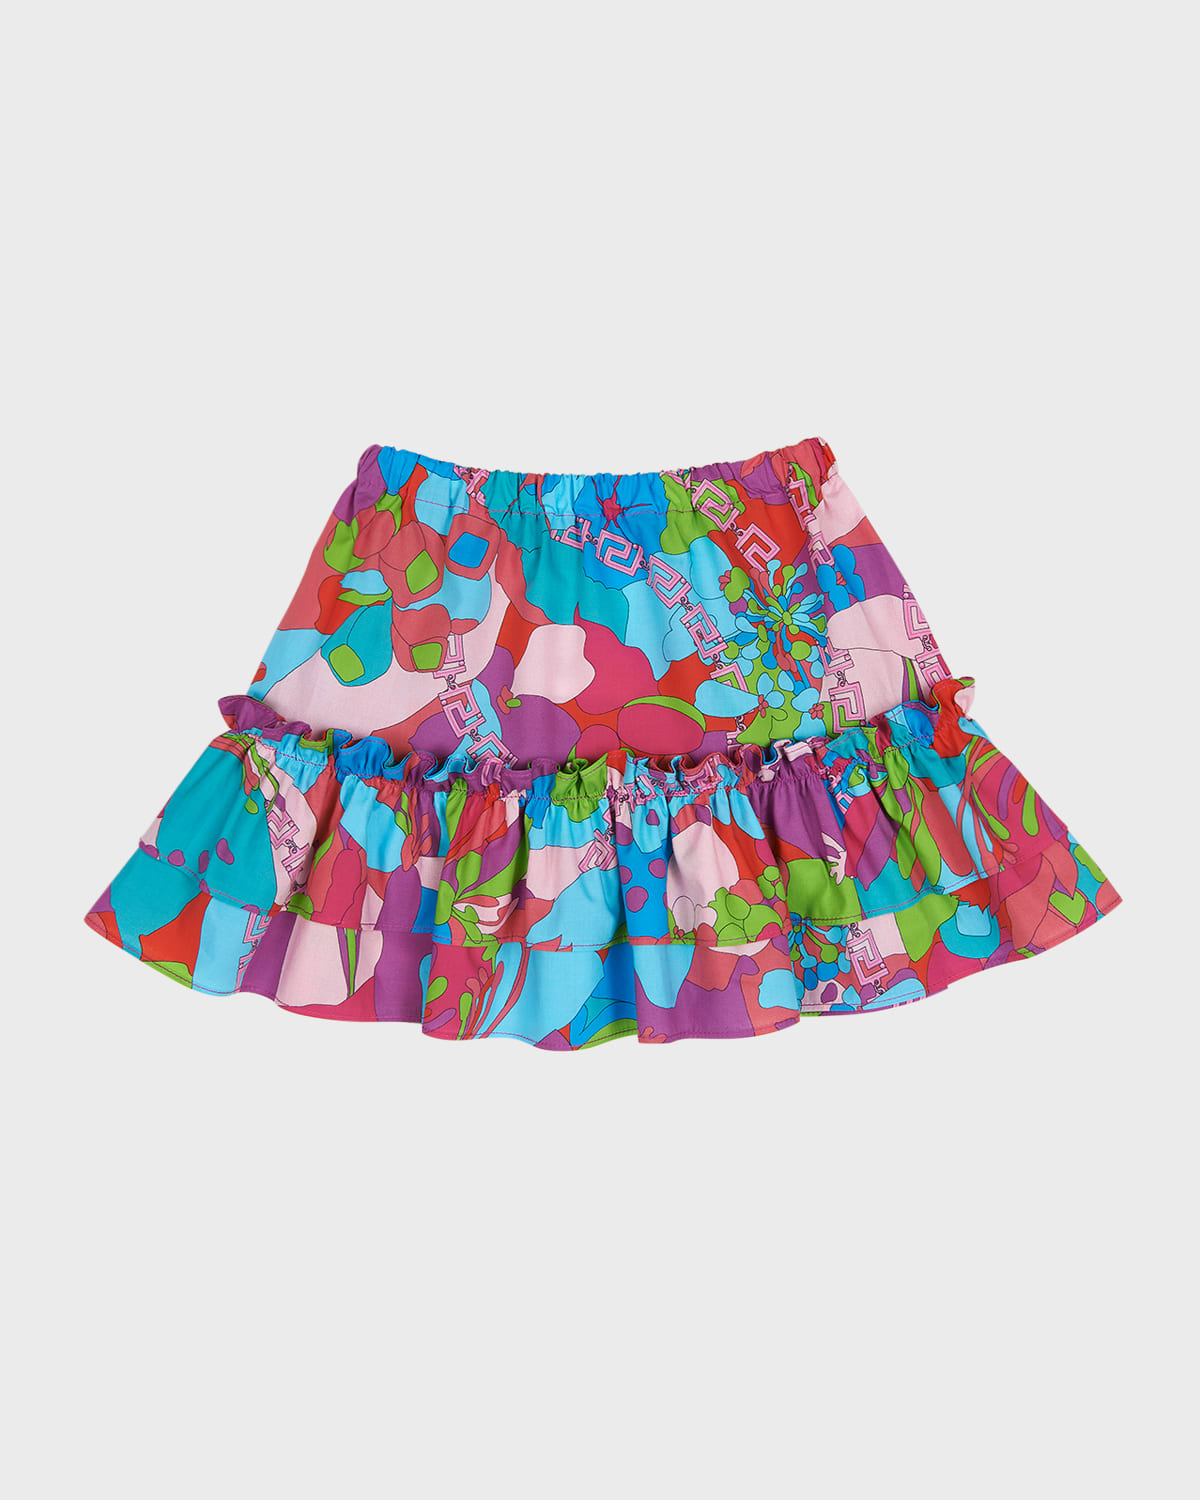 Girl's Floral-Print Cotton Skirt, Size 12M-3